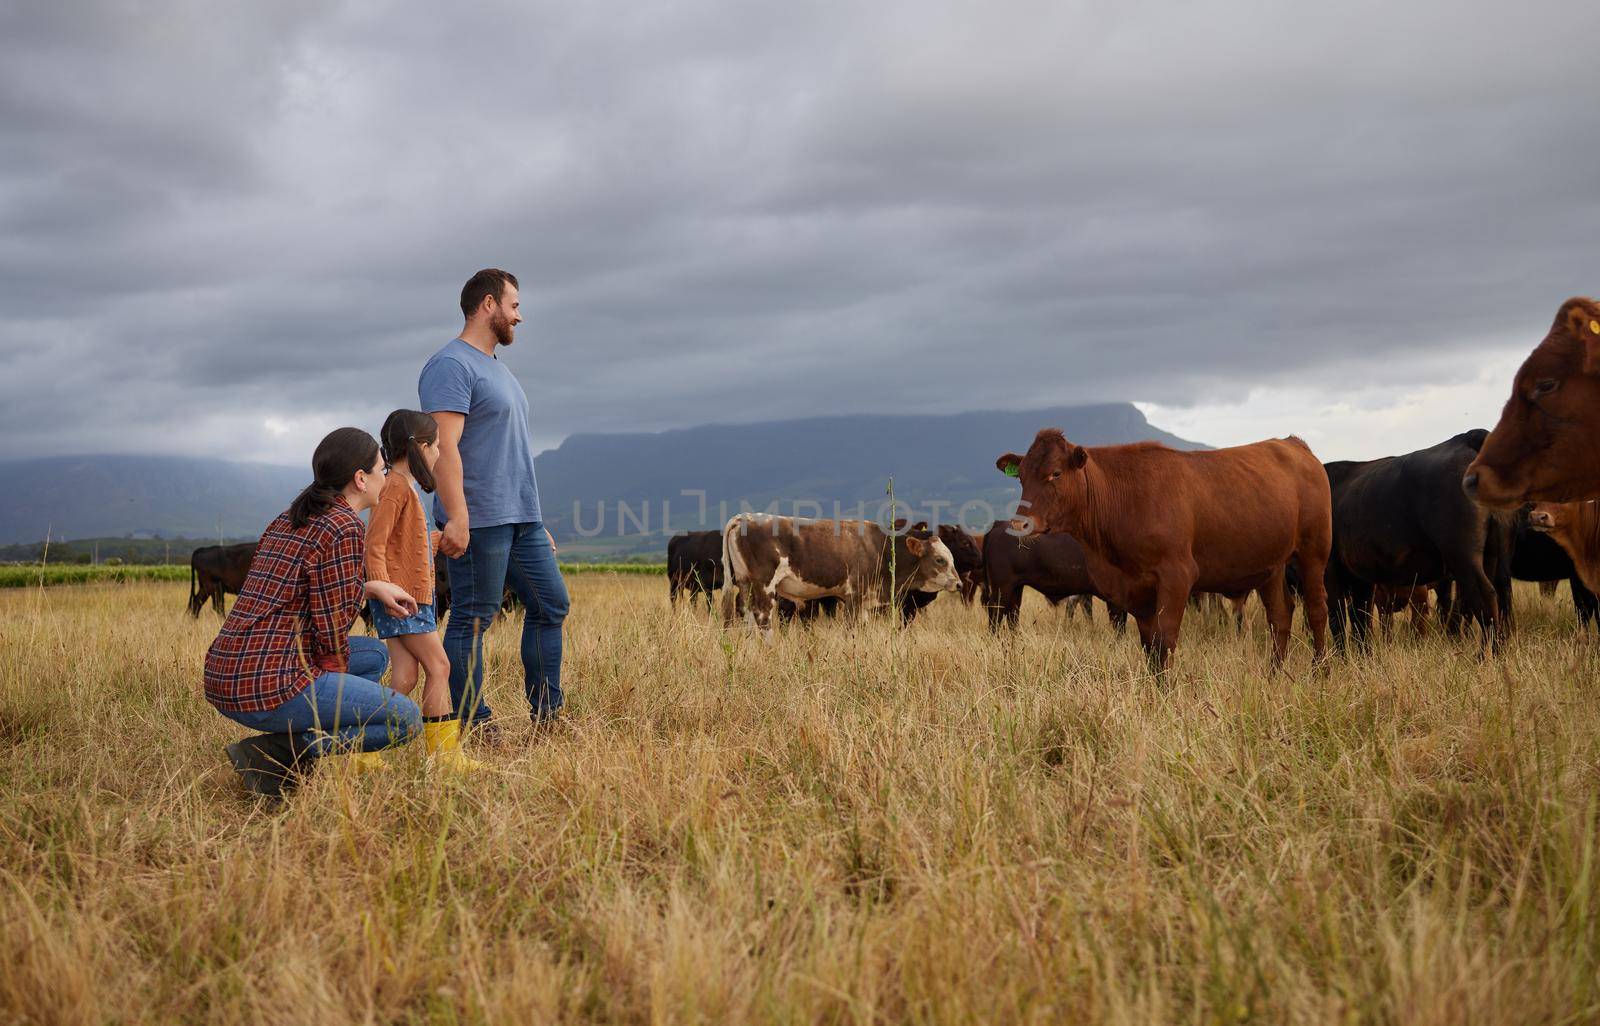 Agriculture, countryside family with cows on a farm or grass field with storm clouds in background. Sustainability mother, father and girl with cattle farm animals for beef or meat growth business.